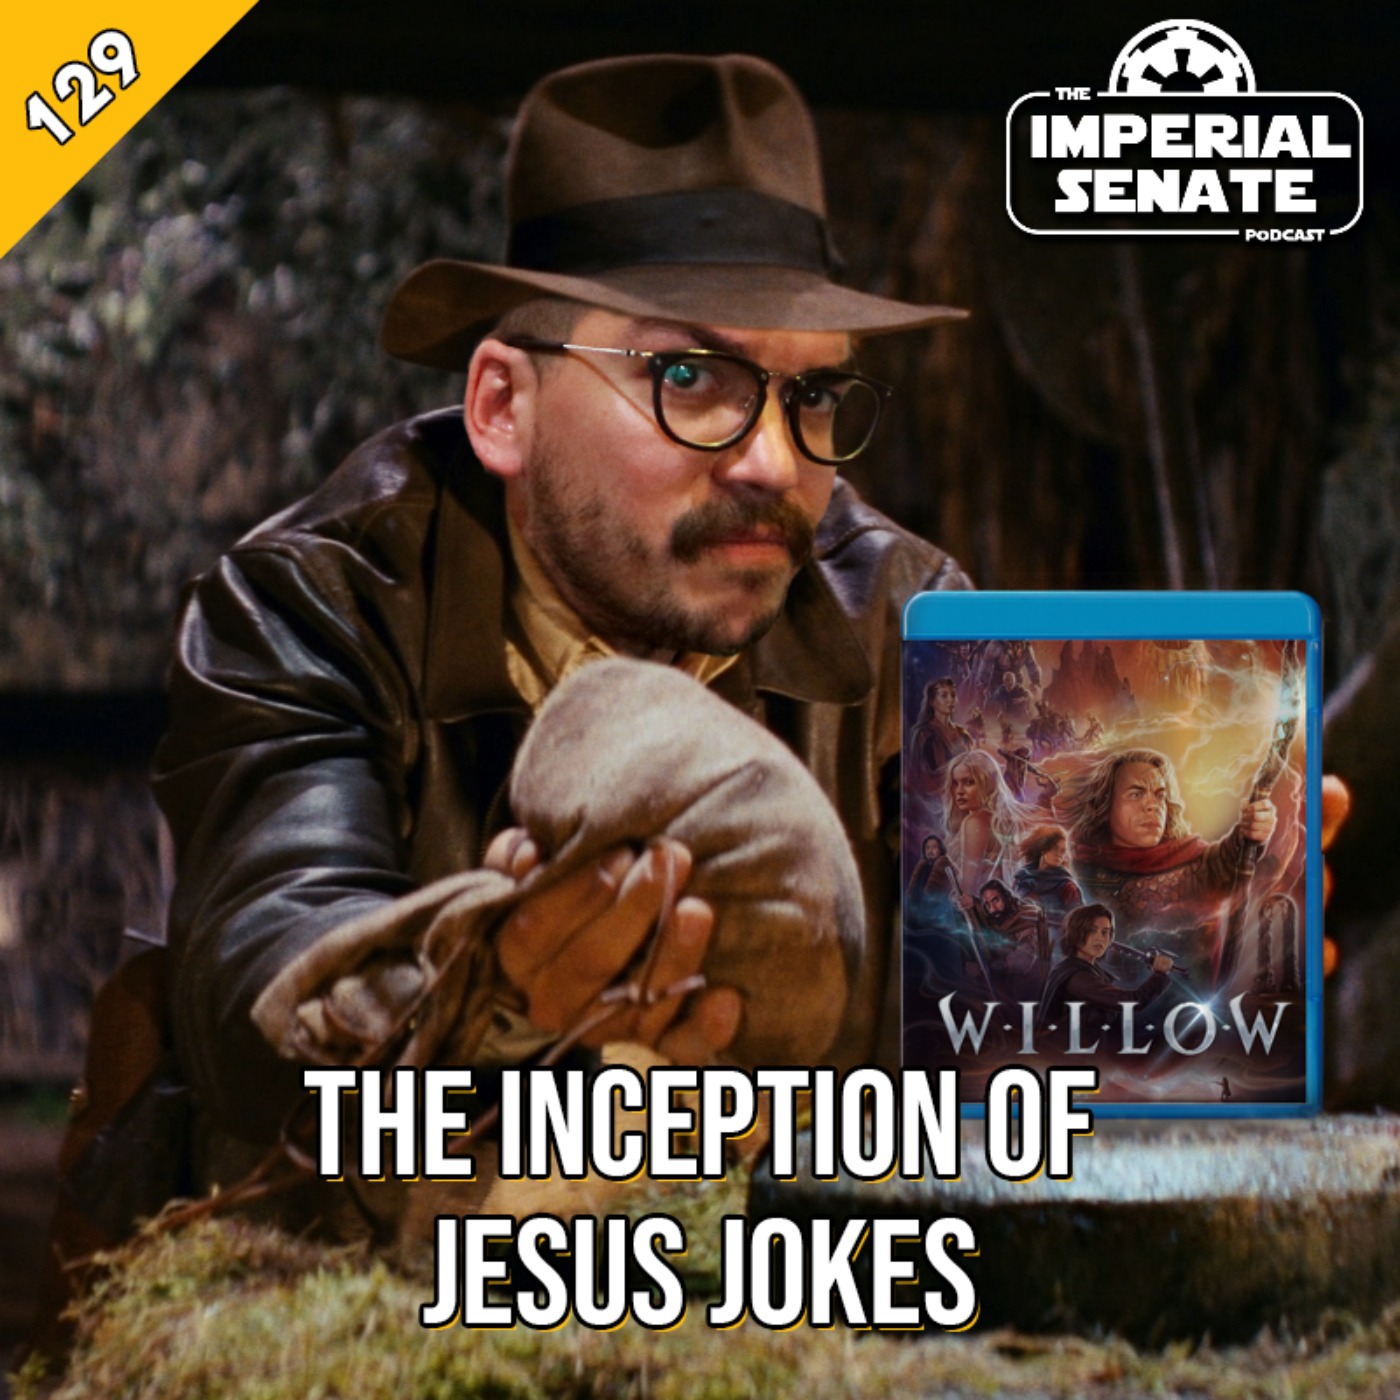 The Imperial Senate Podcast: Episode 129 - The Inception of Jesus Jokes